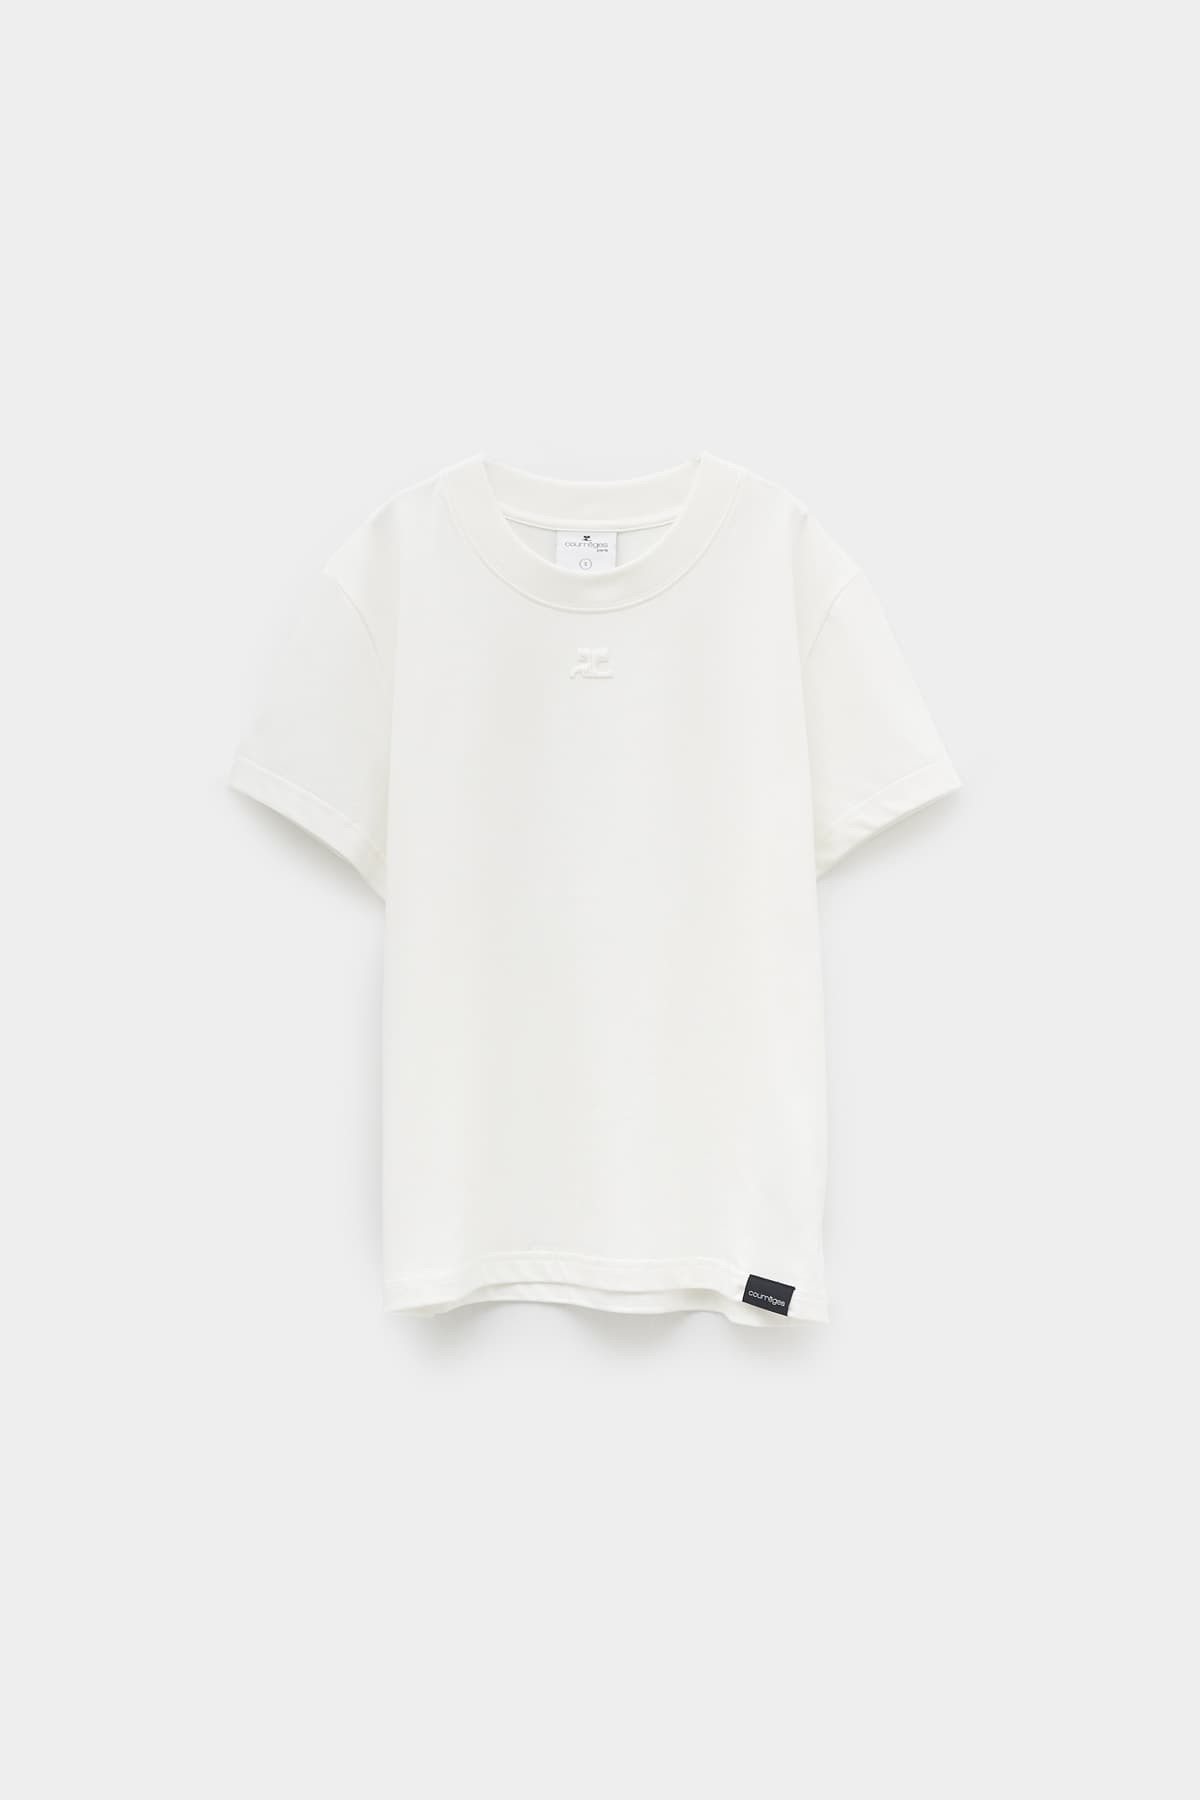 COURREGES HERITAGE WHITE AC STRAIGHT DRY T-SHIRT IAMNUE